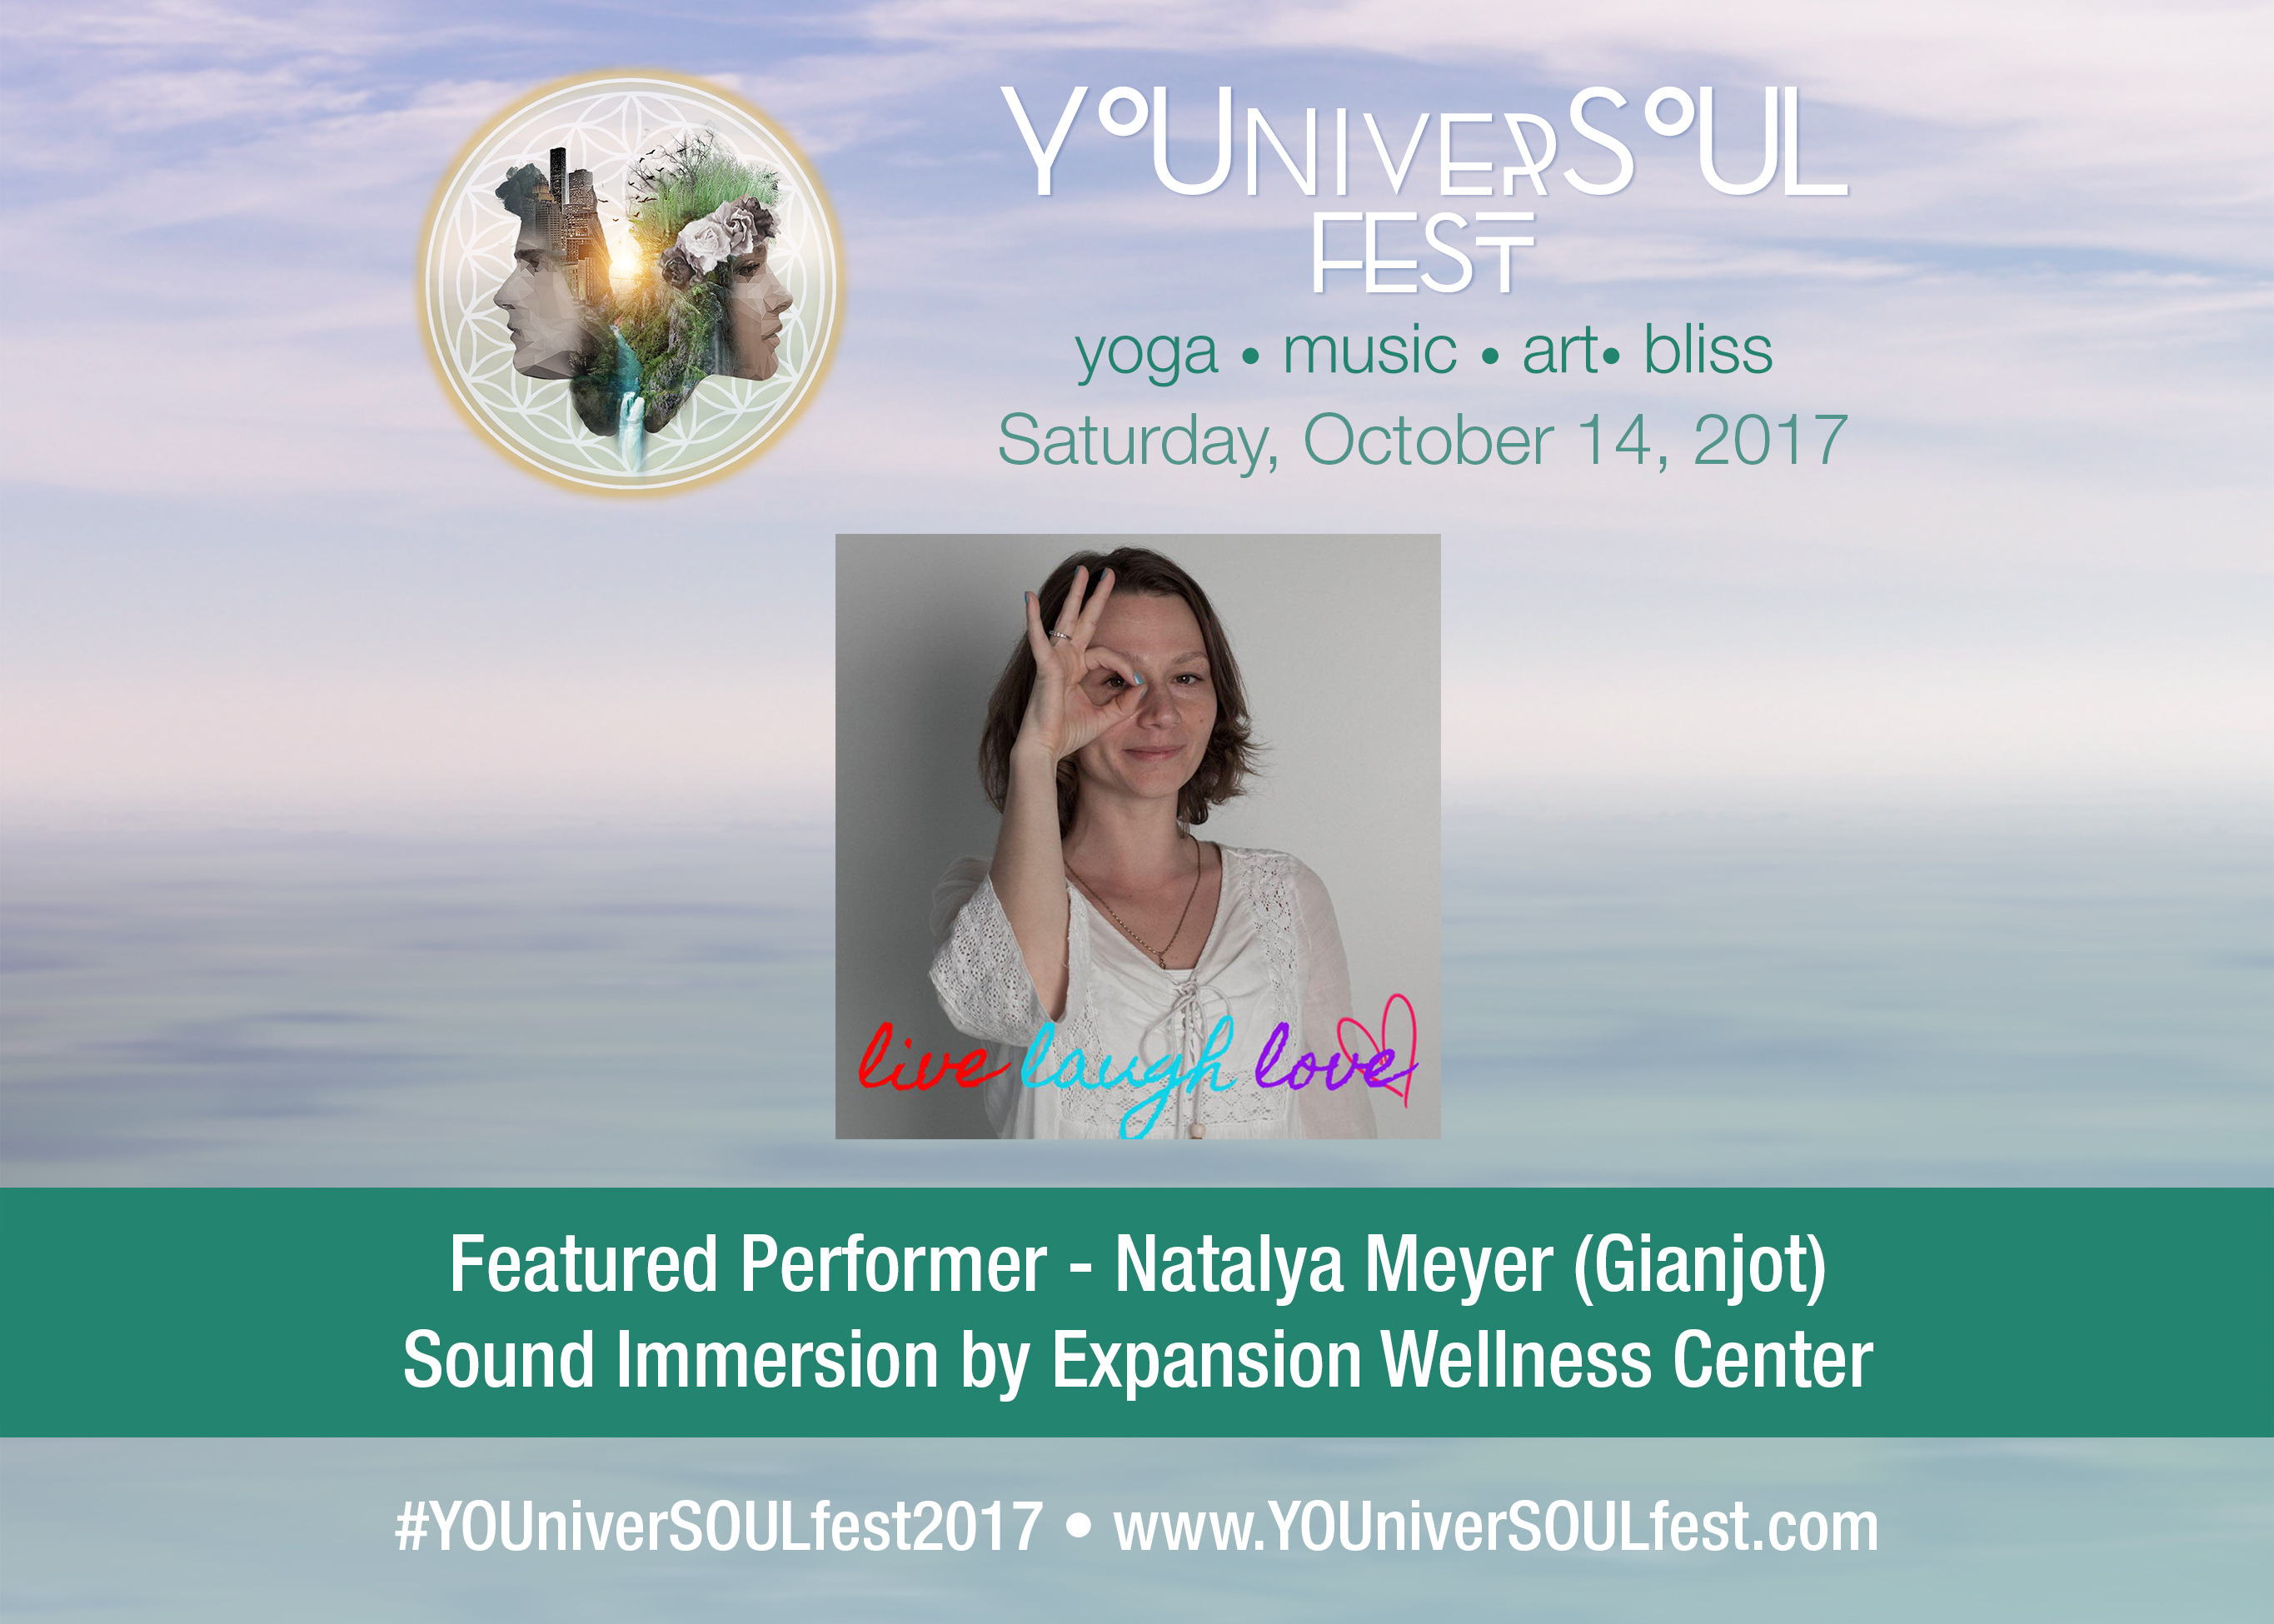 Sound Immersion with Expansion Wellness Center featuring Natalya Meyer